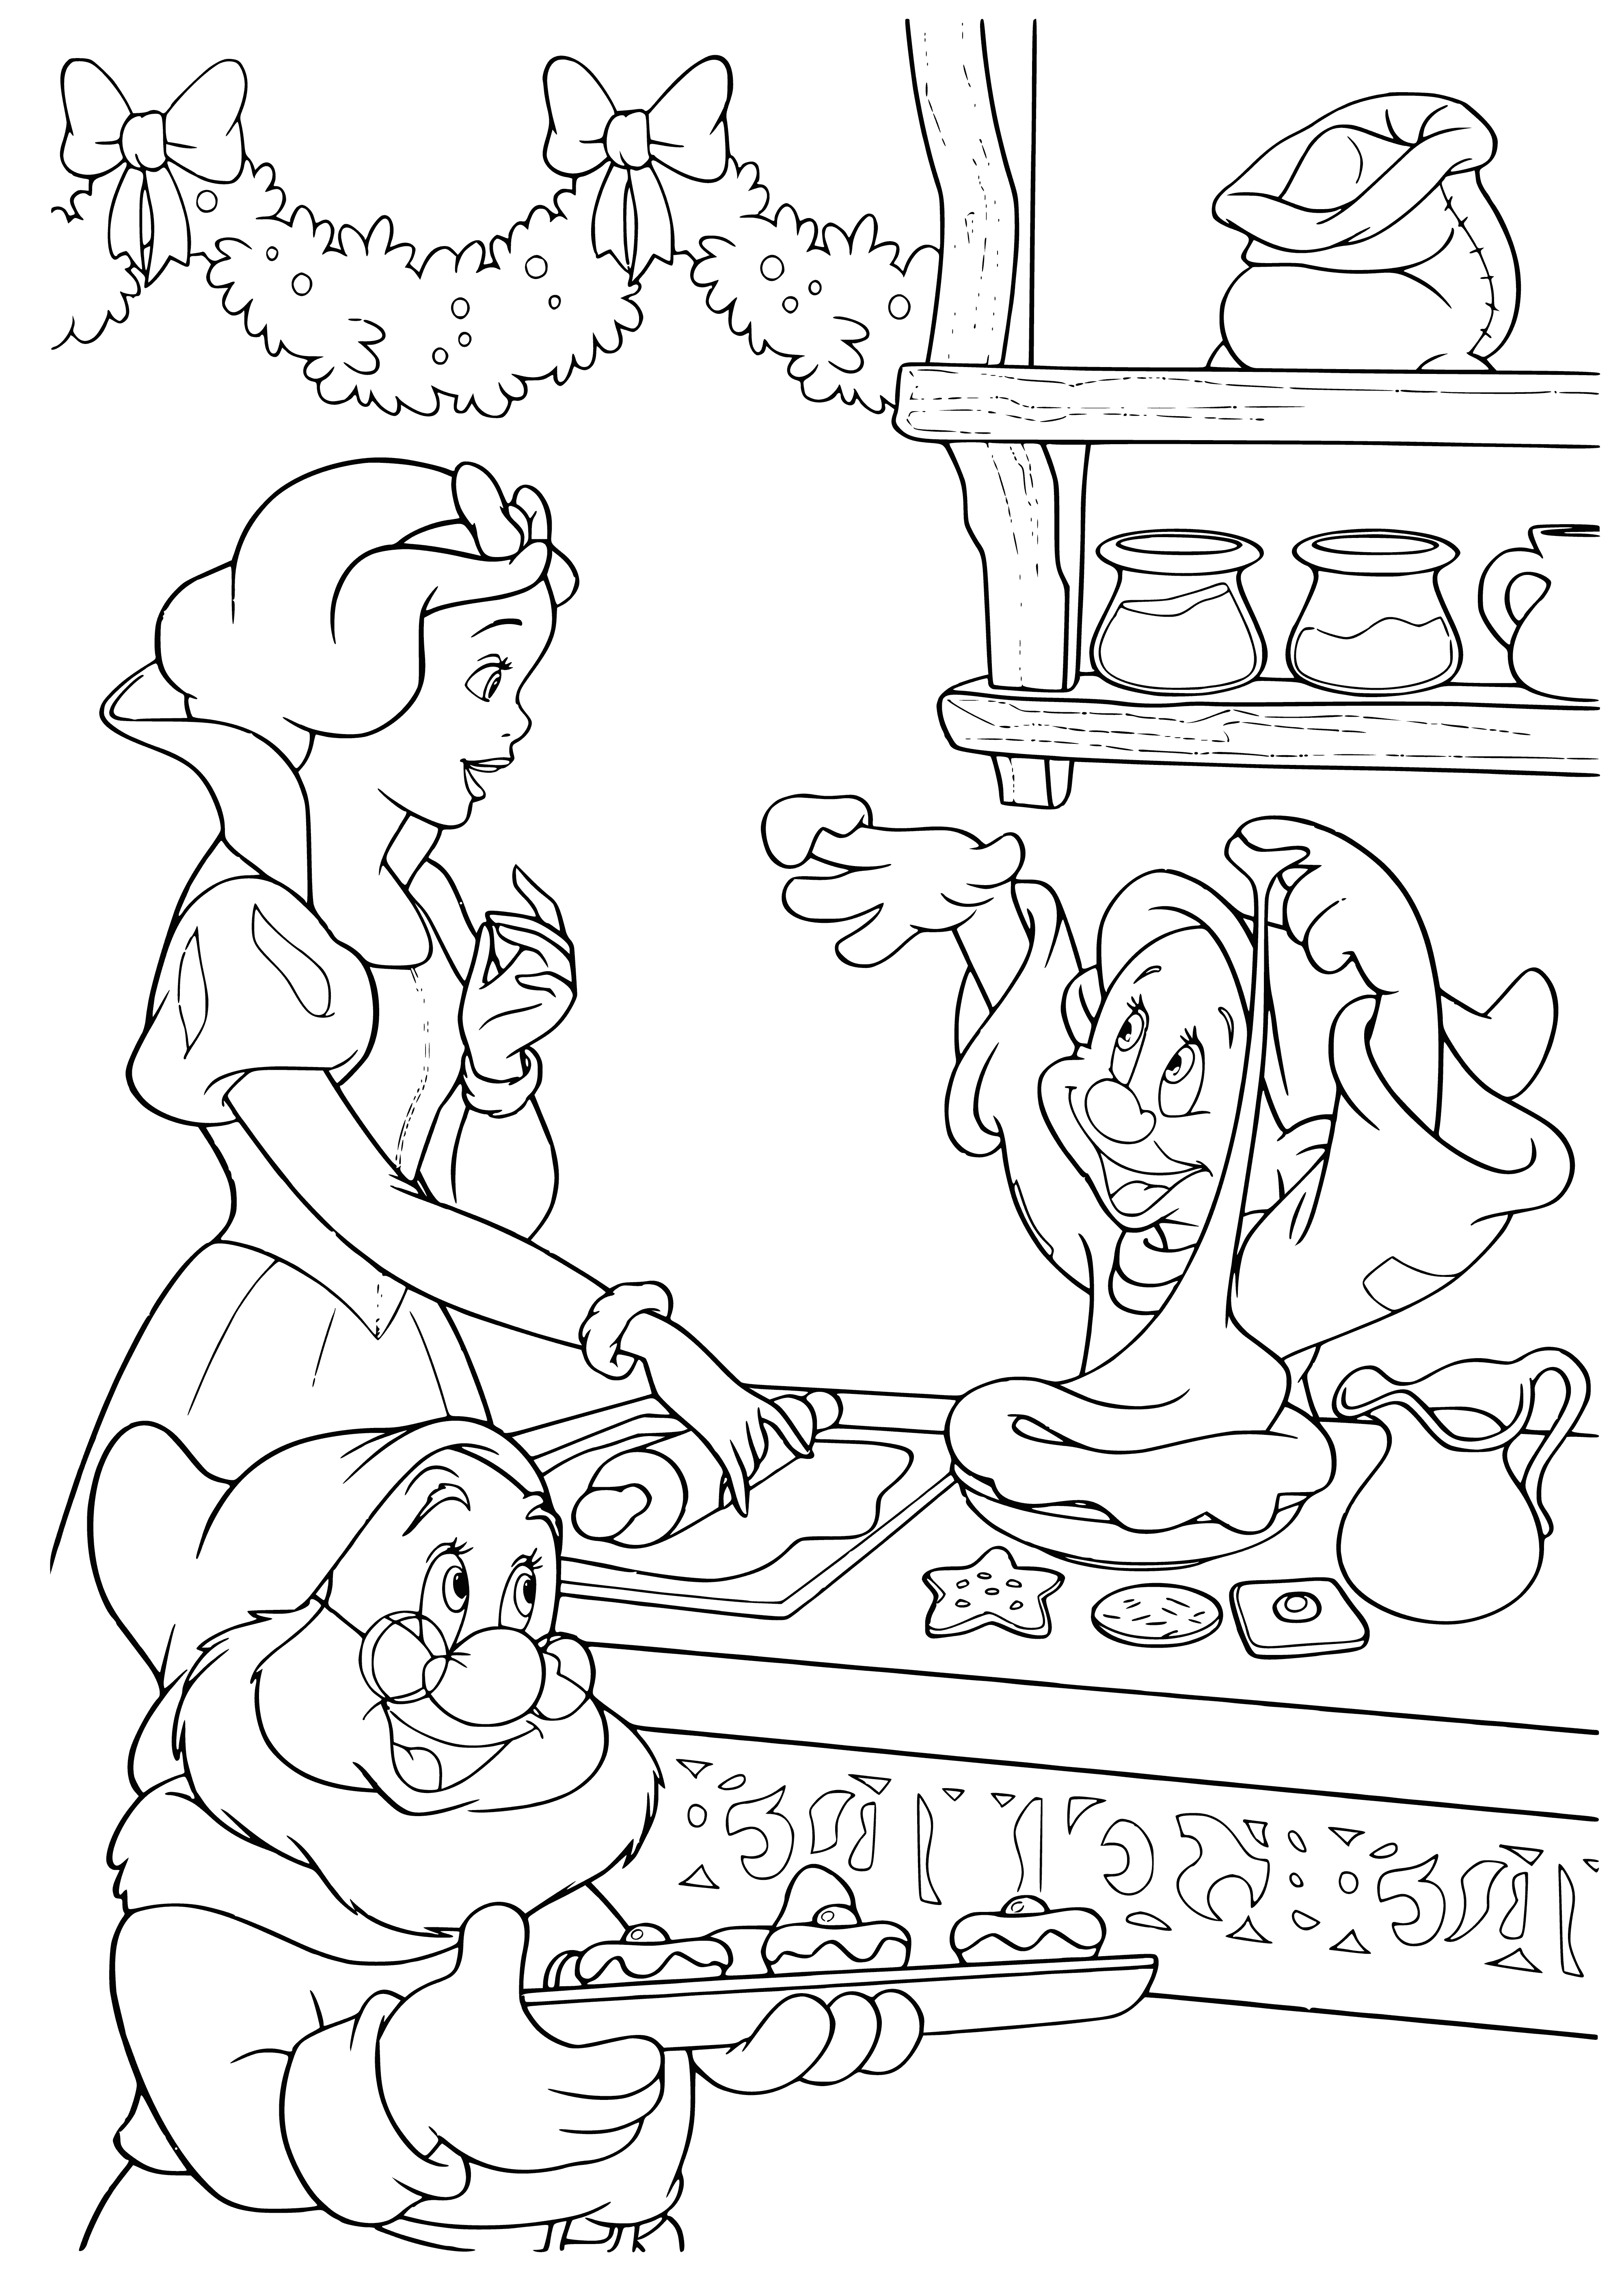 Treat for the New Year coloring page